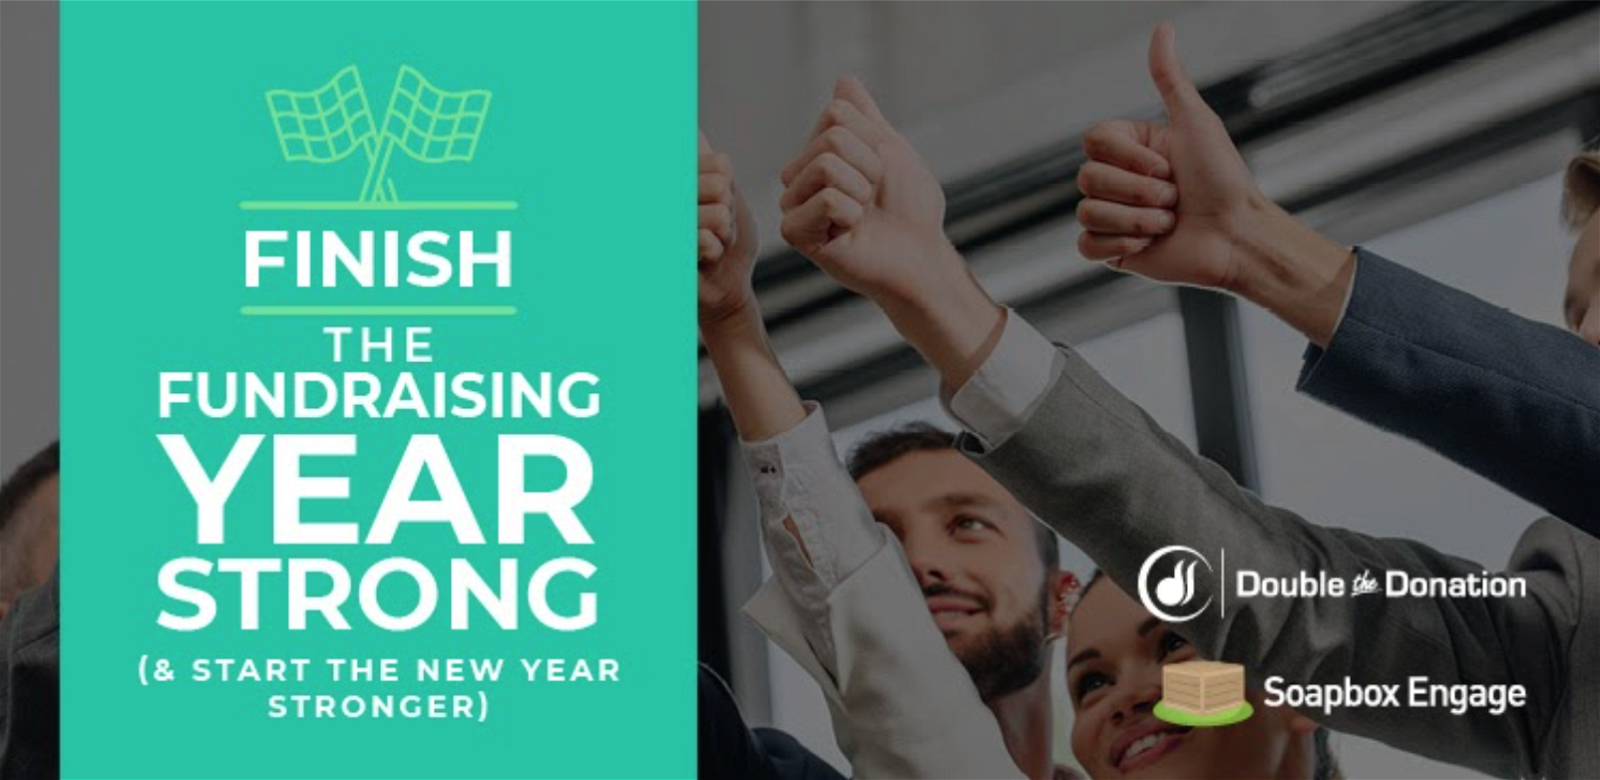 Finish the Fundraising Year Strong